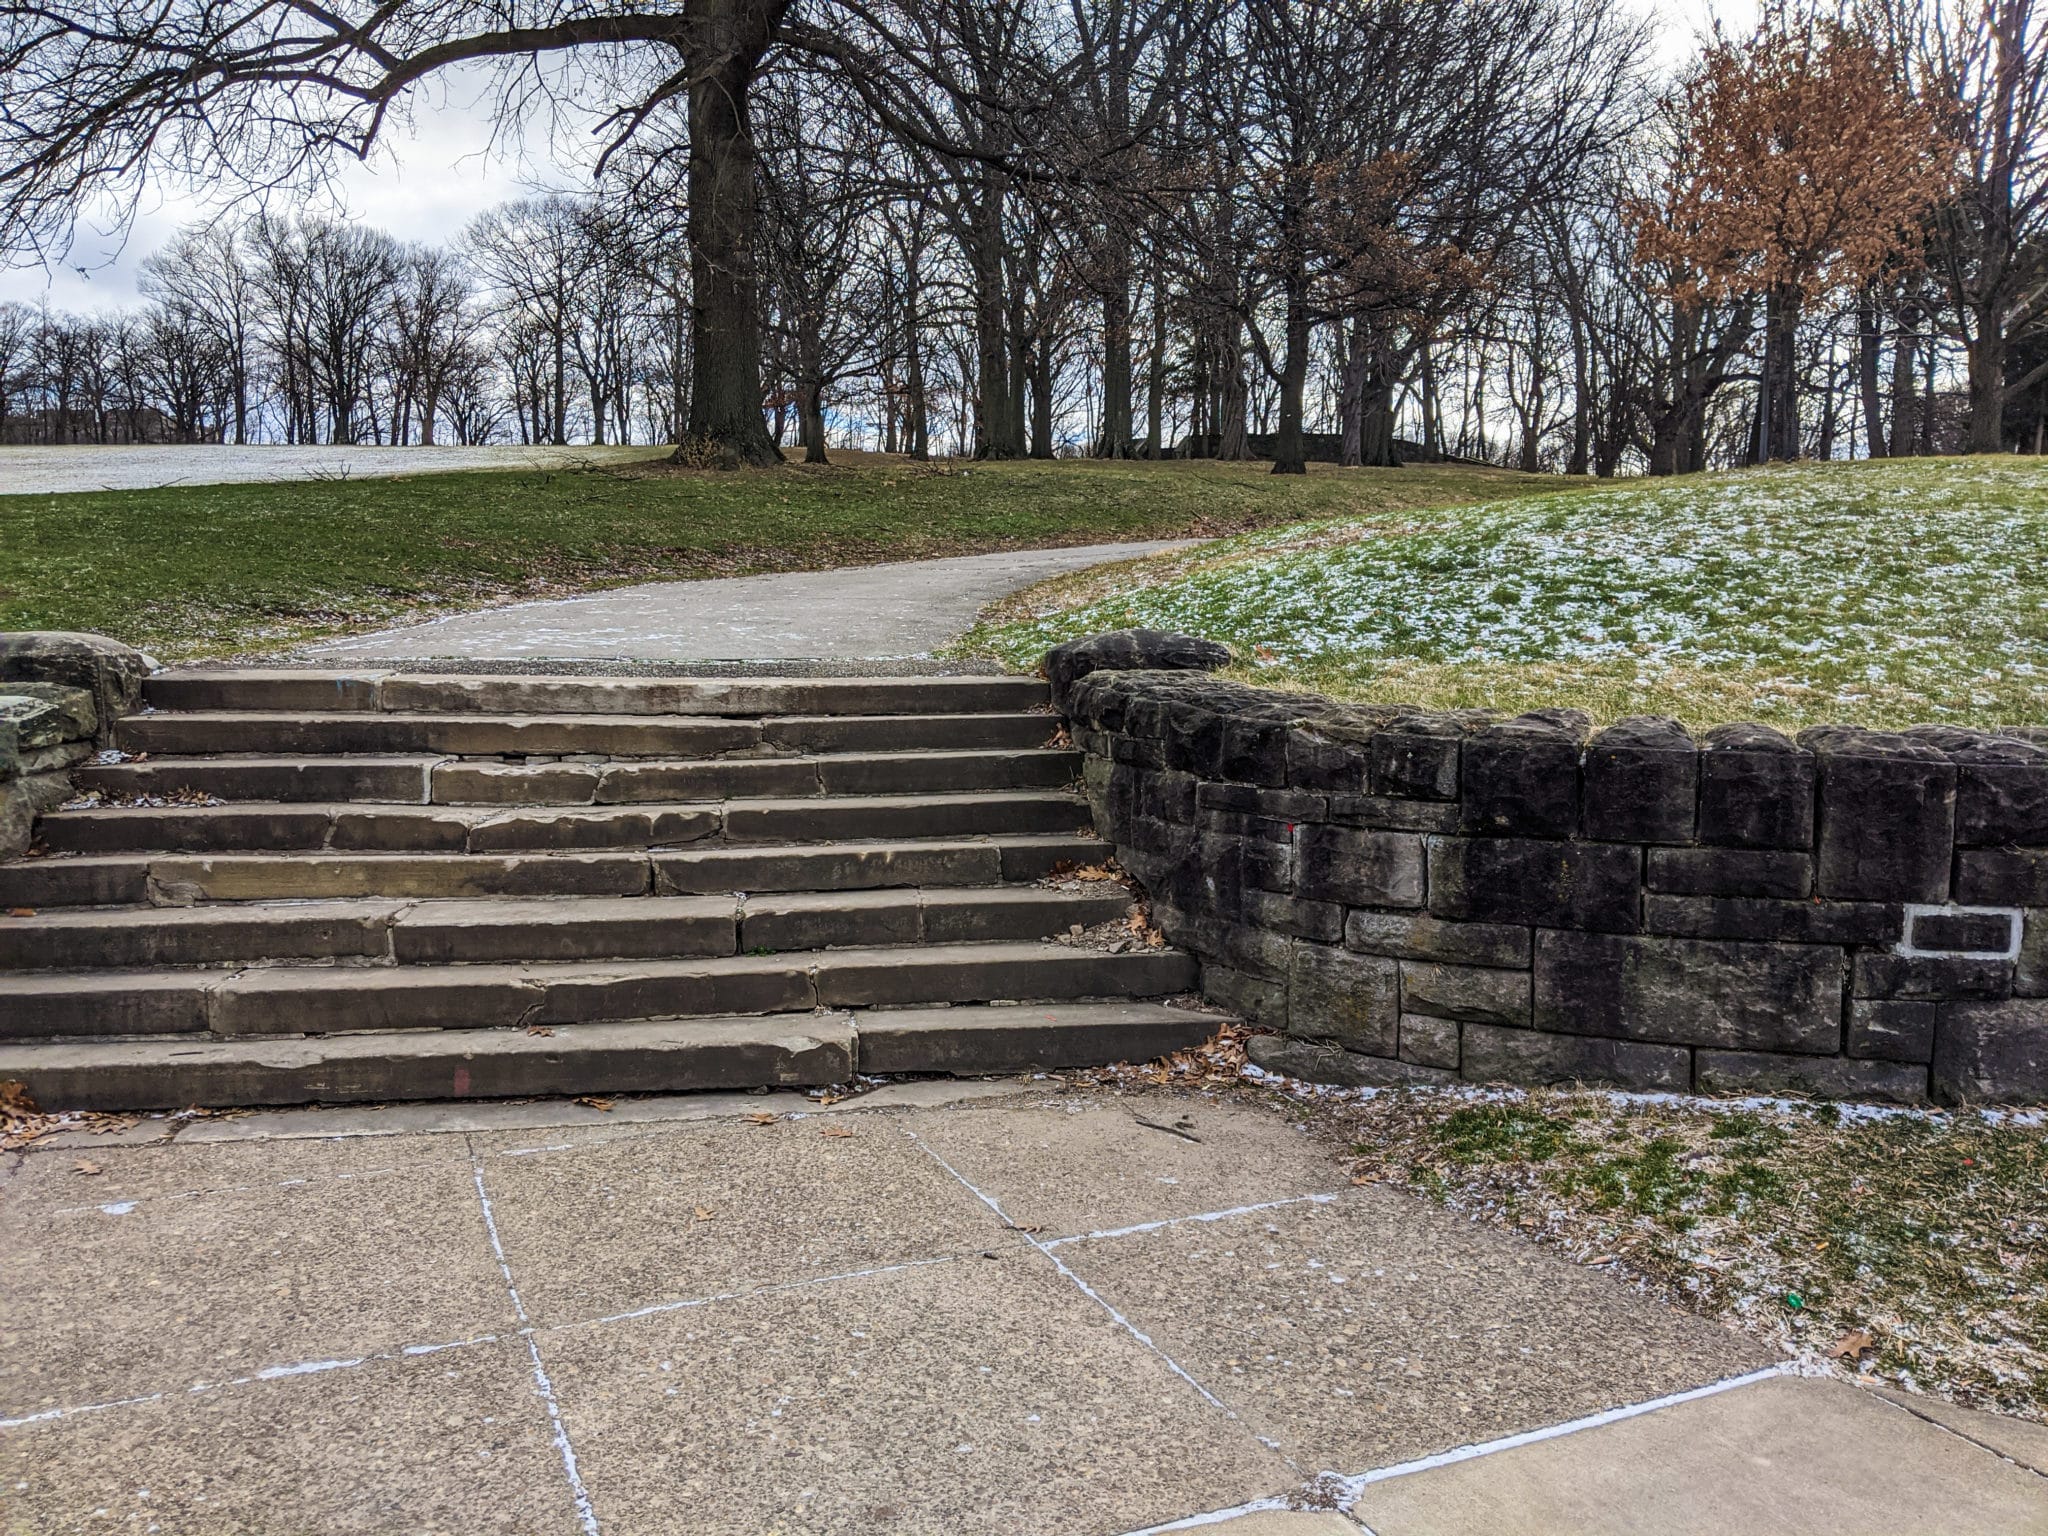 The stairs leading up to the top of Flagstaff Hill